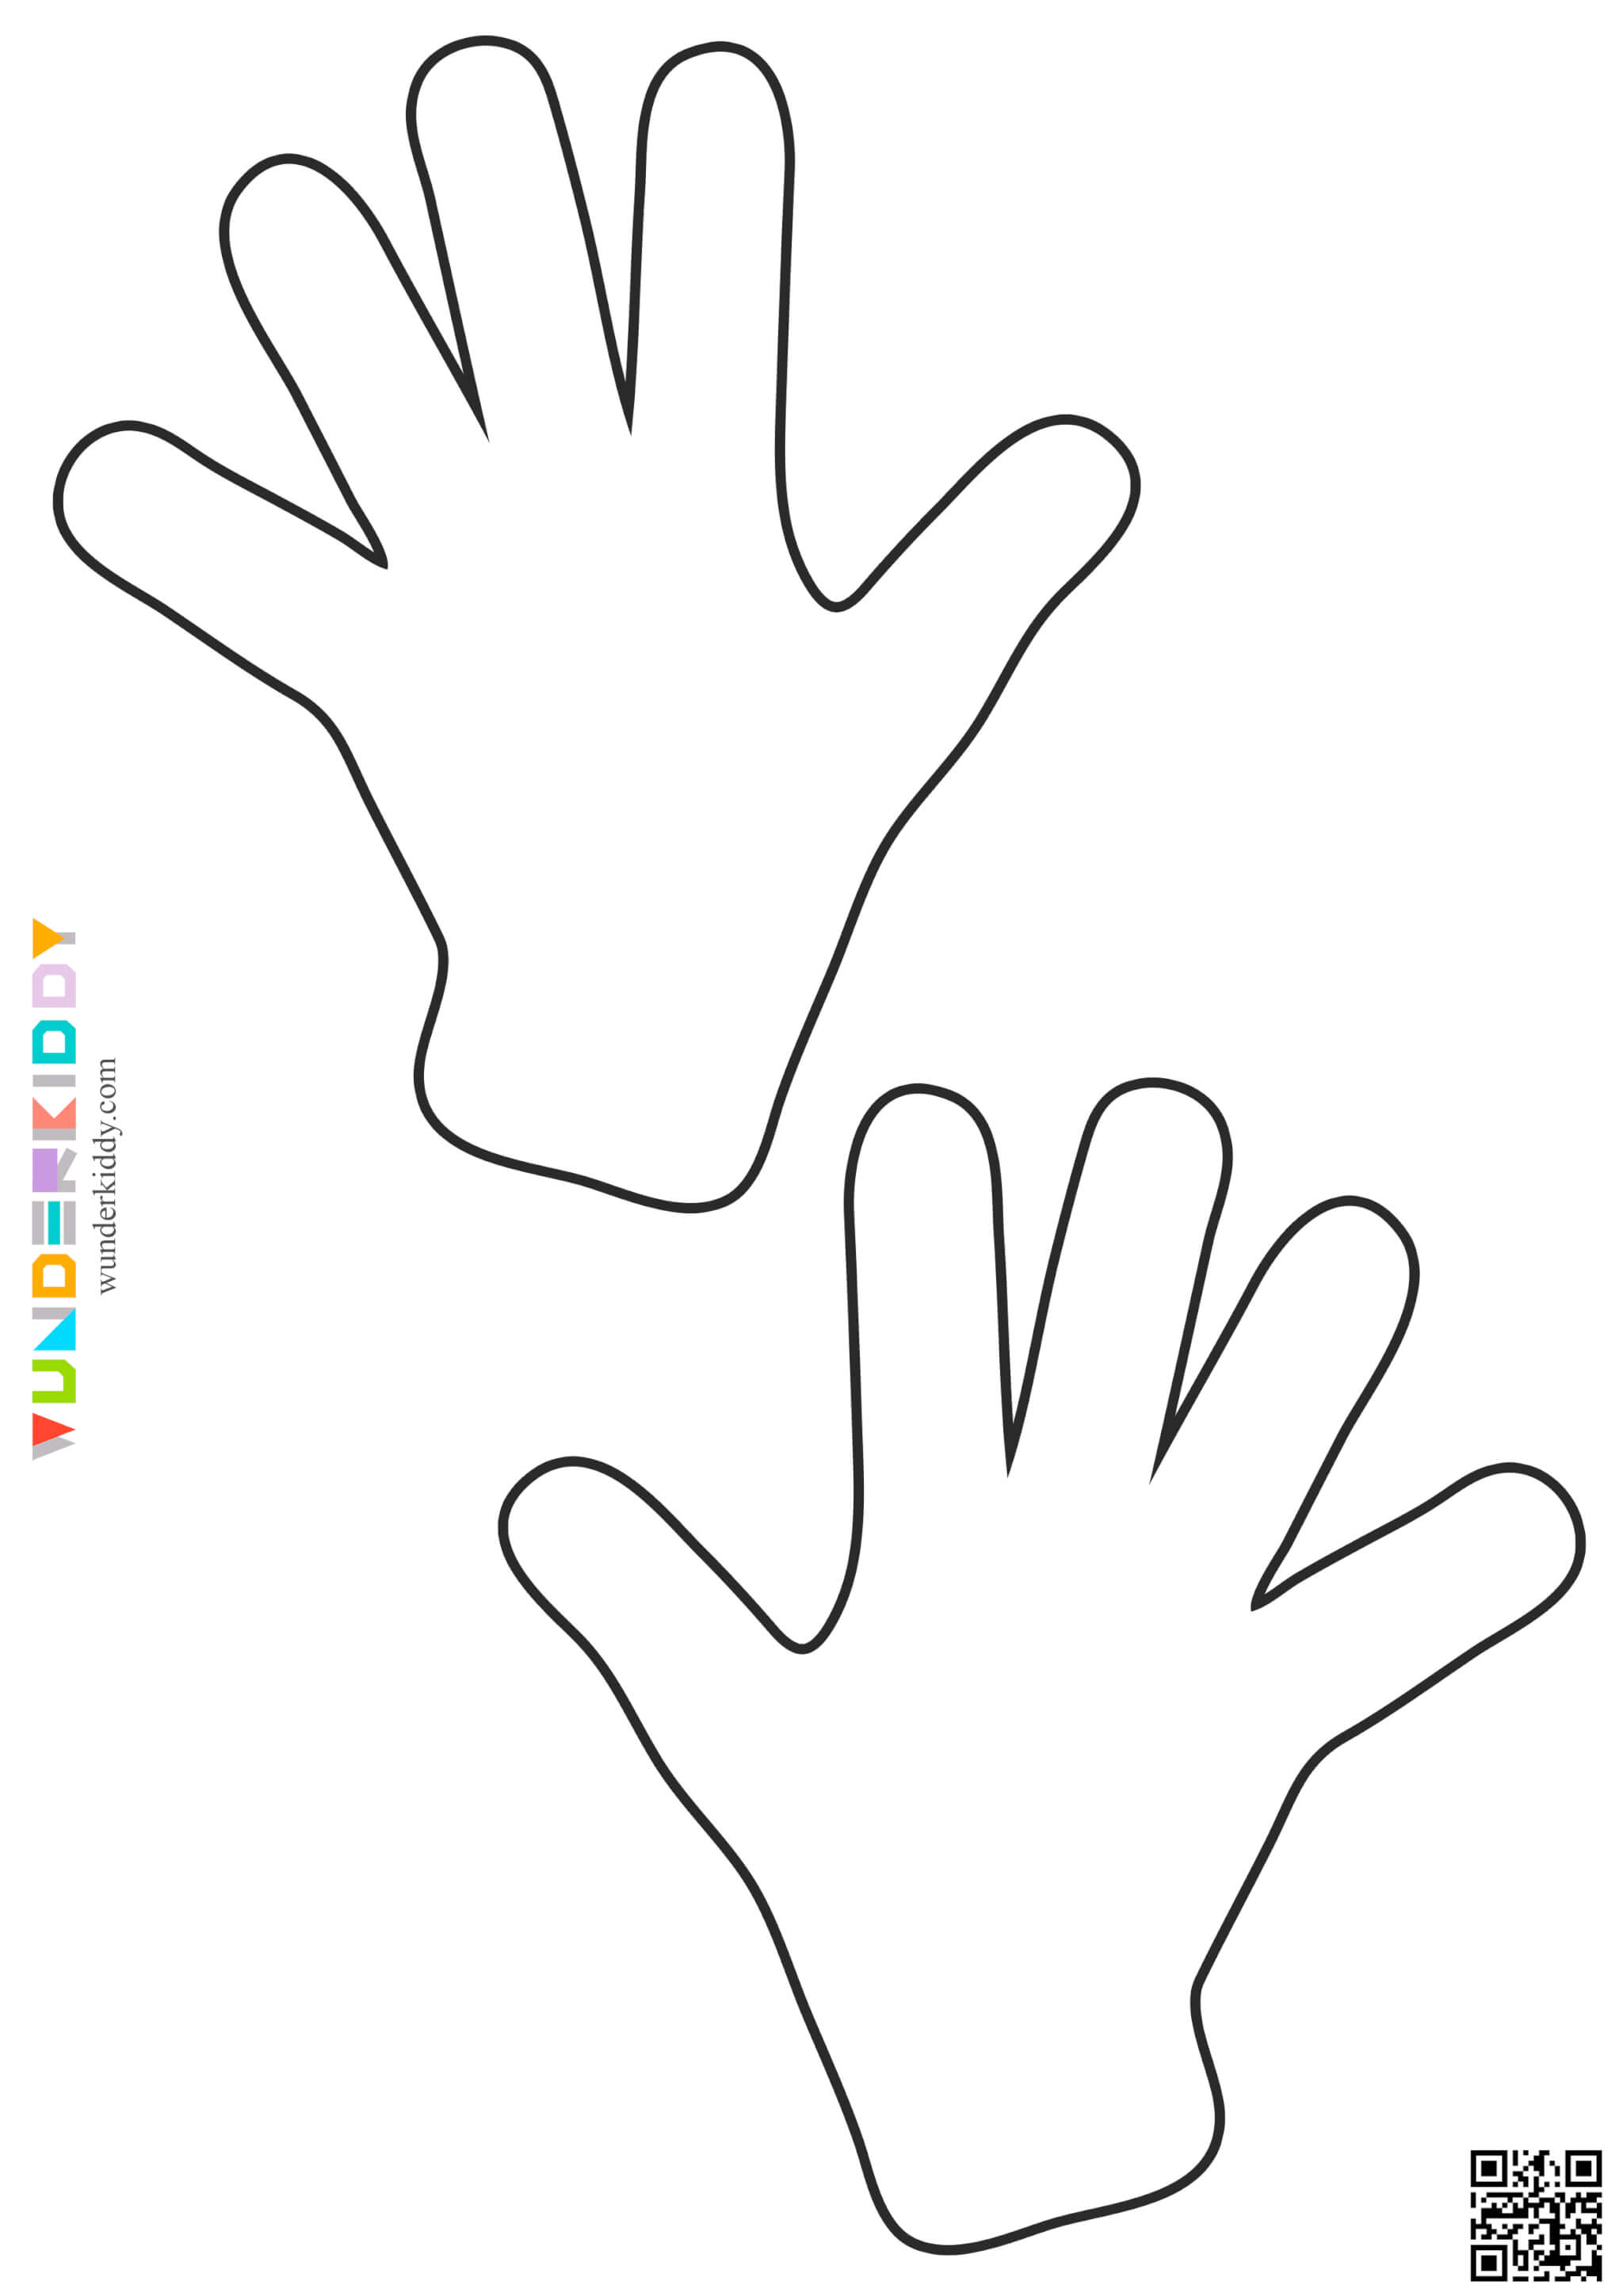 Printable Hands Template - Image 8